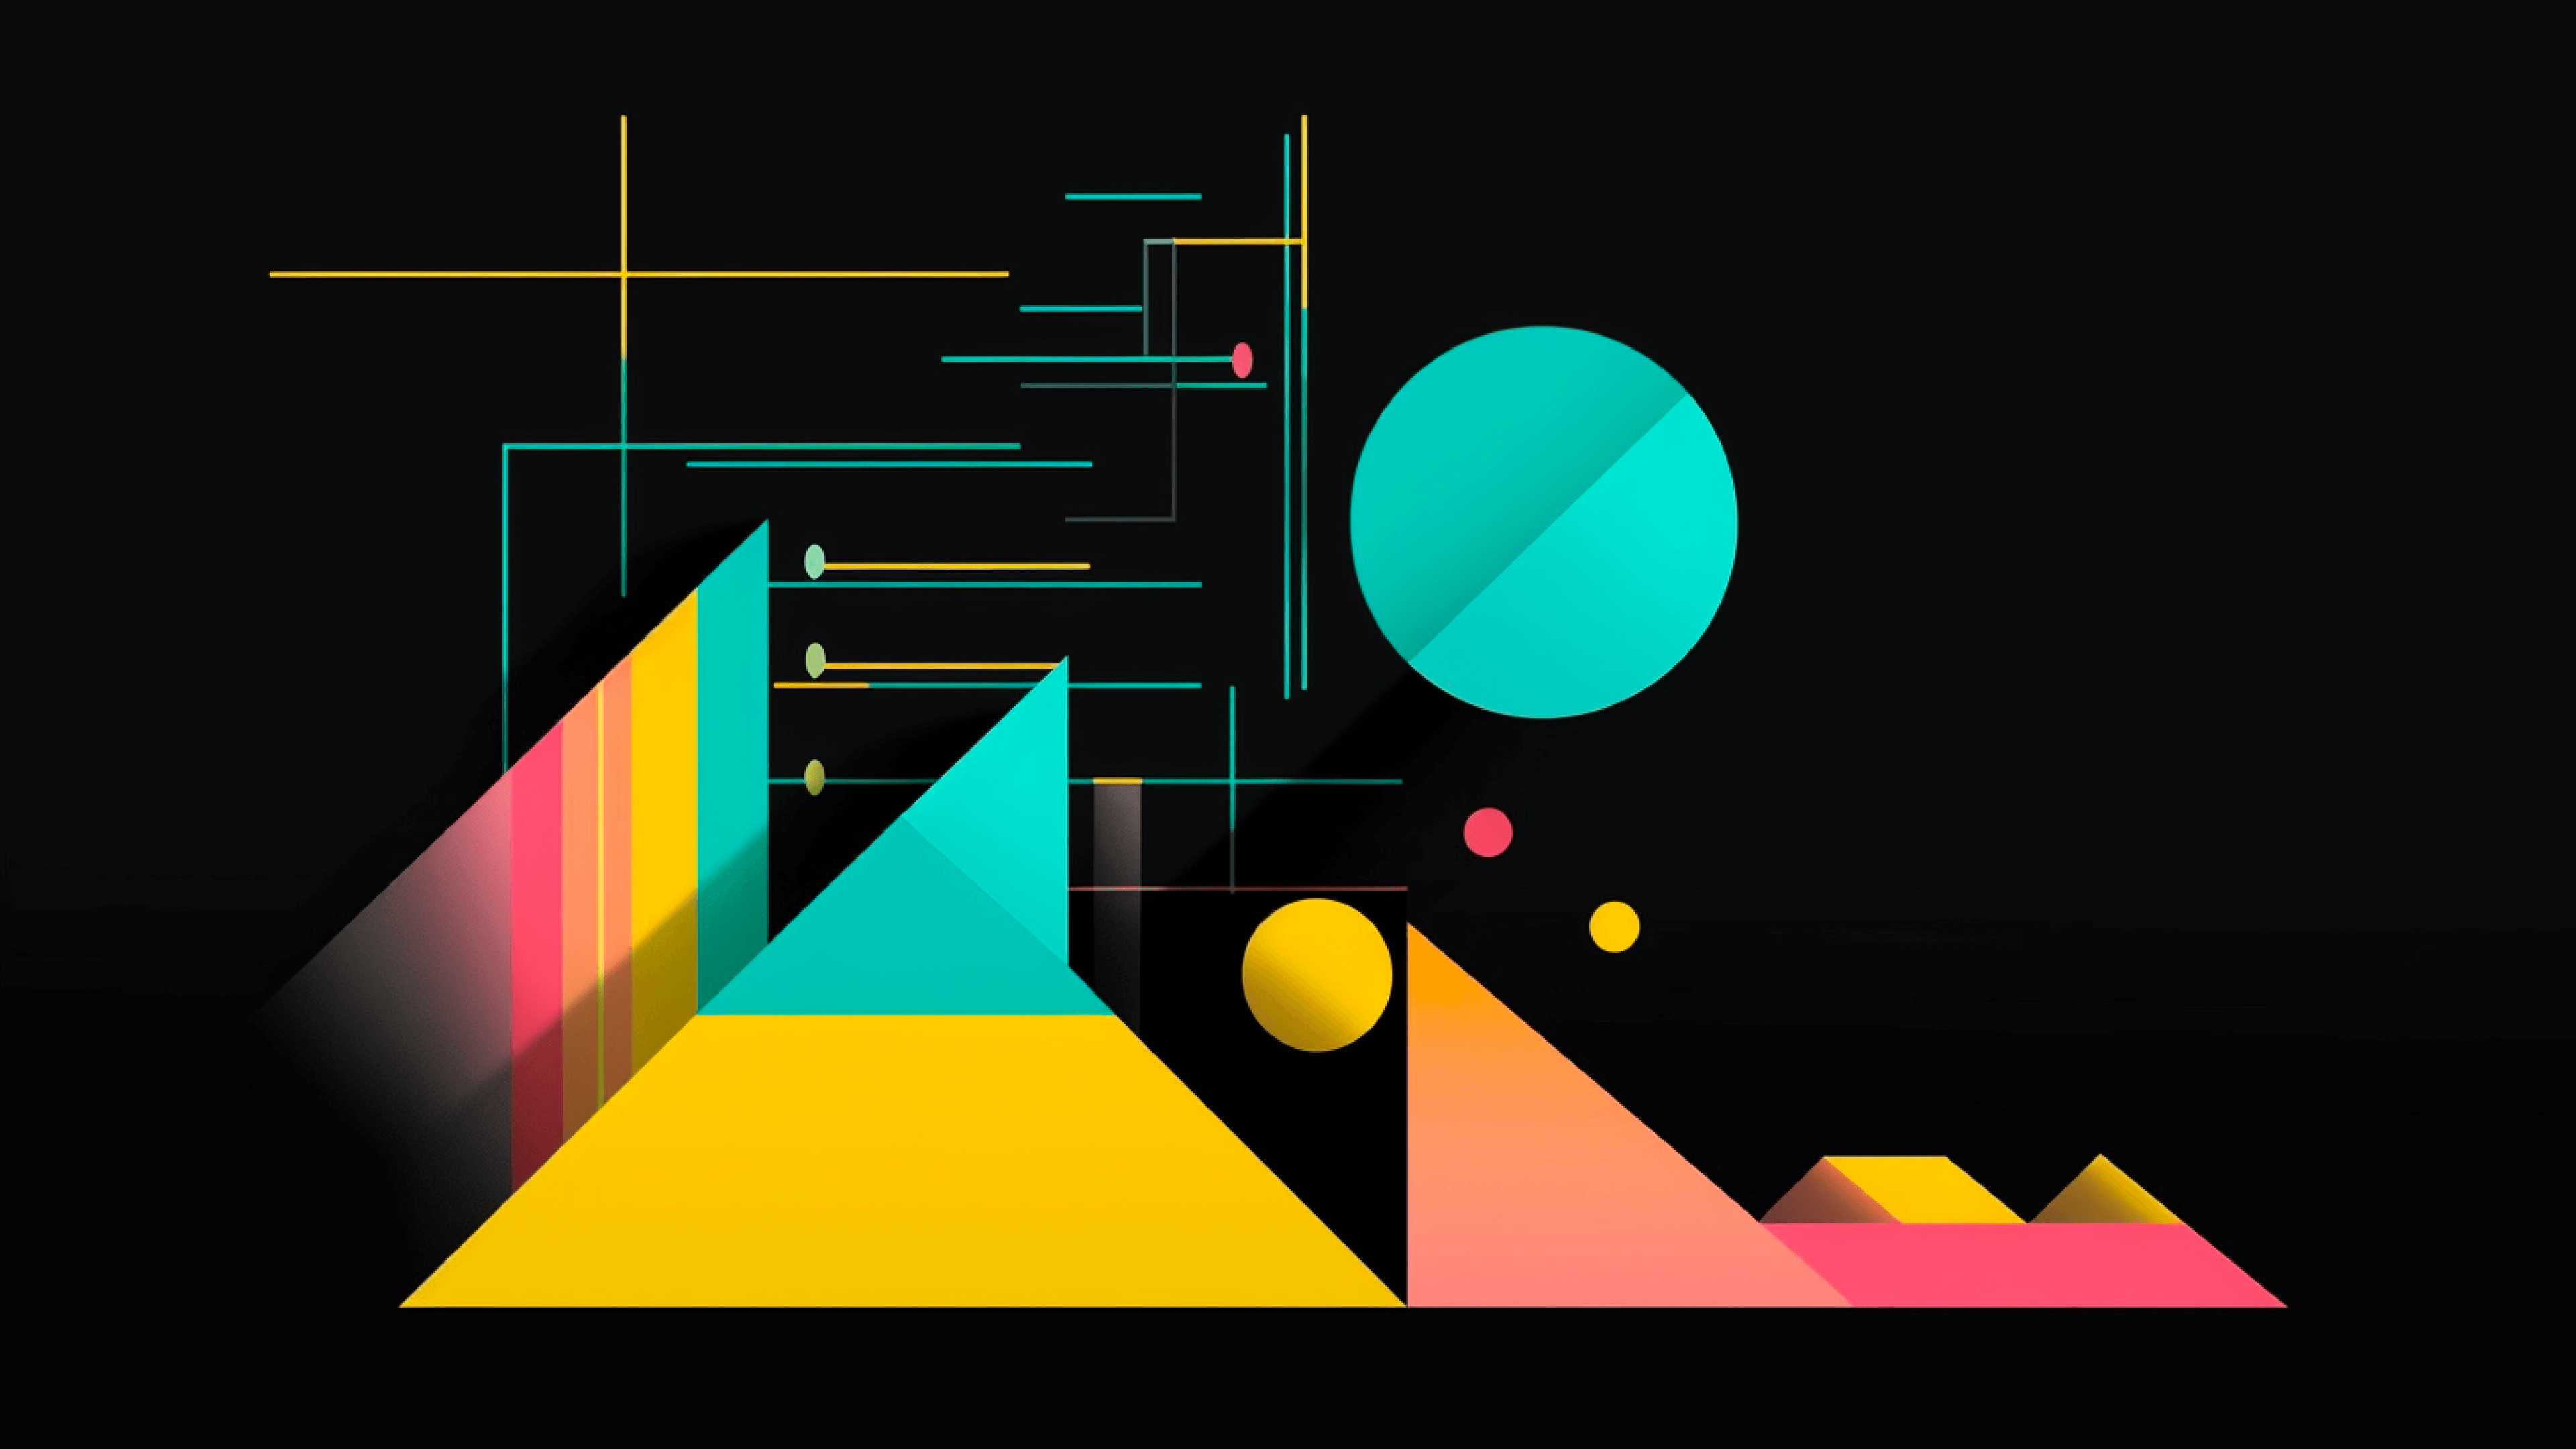 Abstract illustrative coloured shapes - triangles, circles, lines and other geometric shapes, in shades of yellow, teal, orange and red